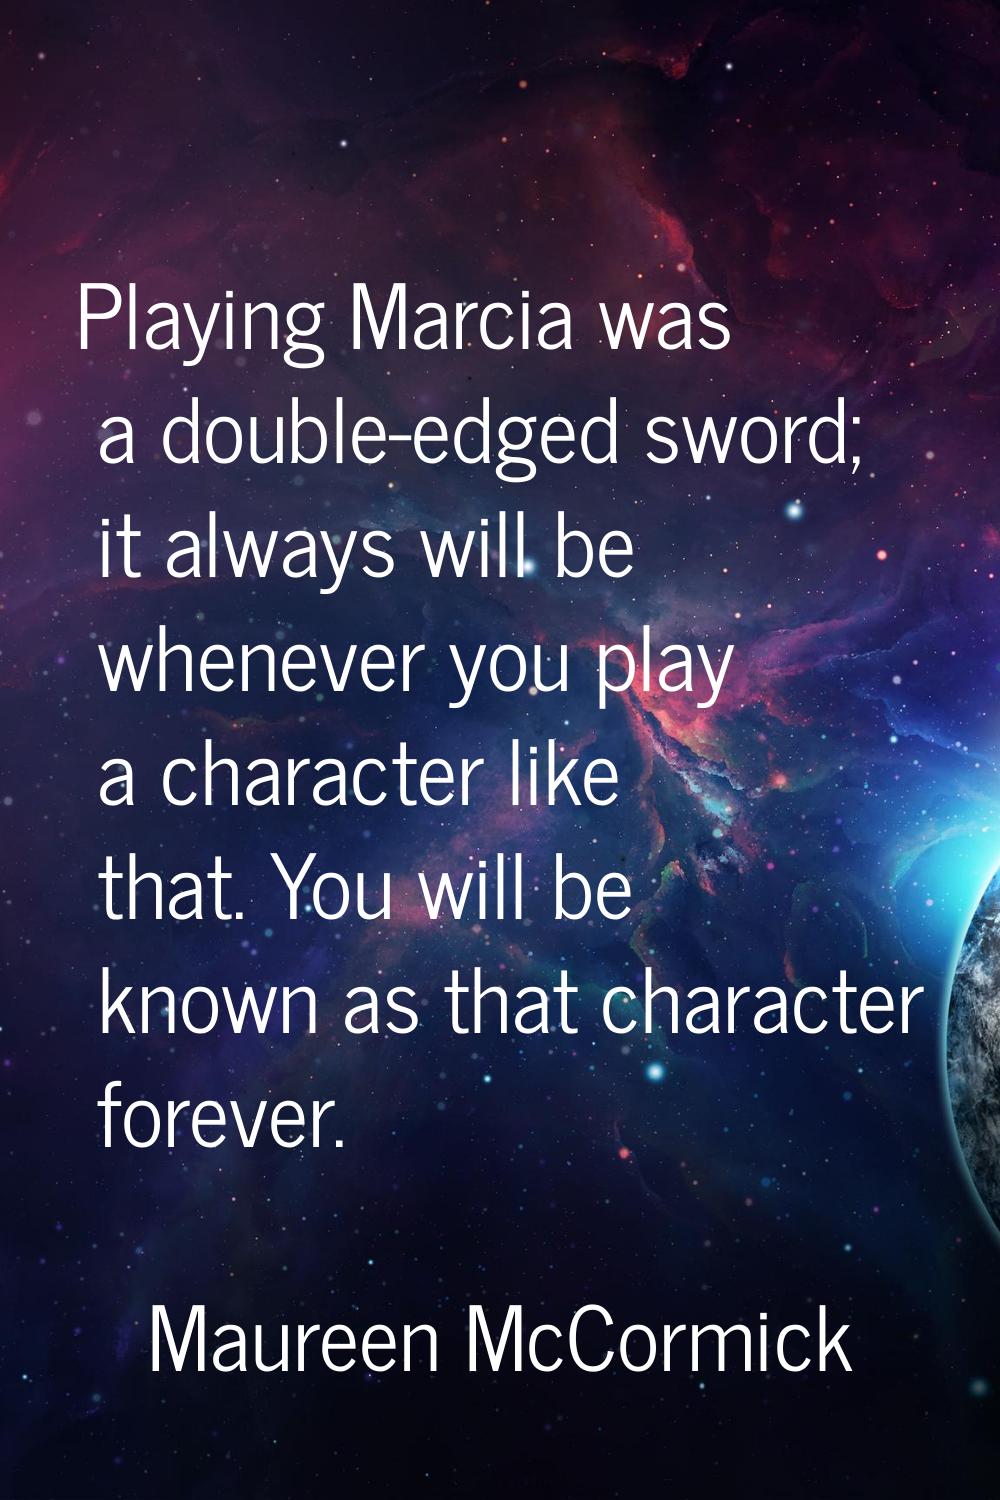 Playing Marcia was a double-edged sword; it always will be whenever you play a character like that.